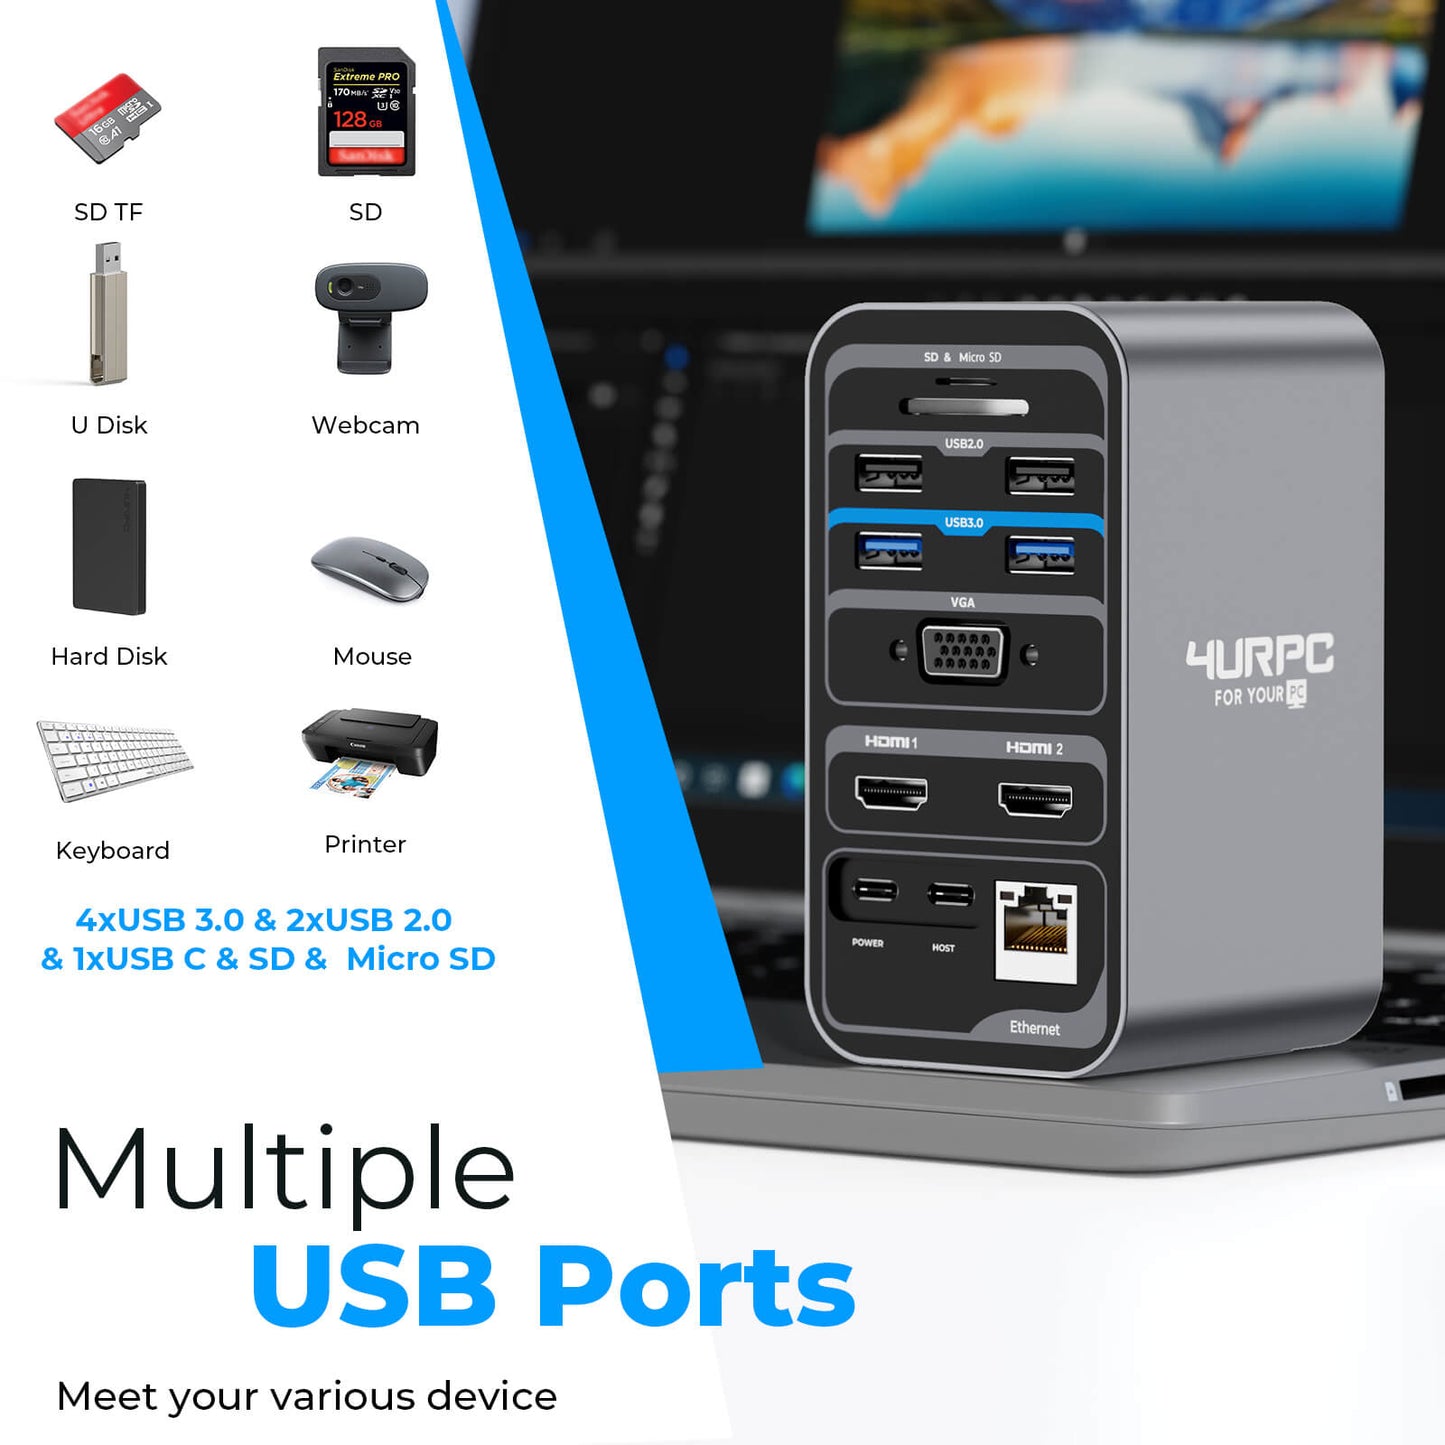 Multiple Data Transfer Ports Meet your various device needs